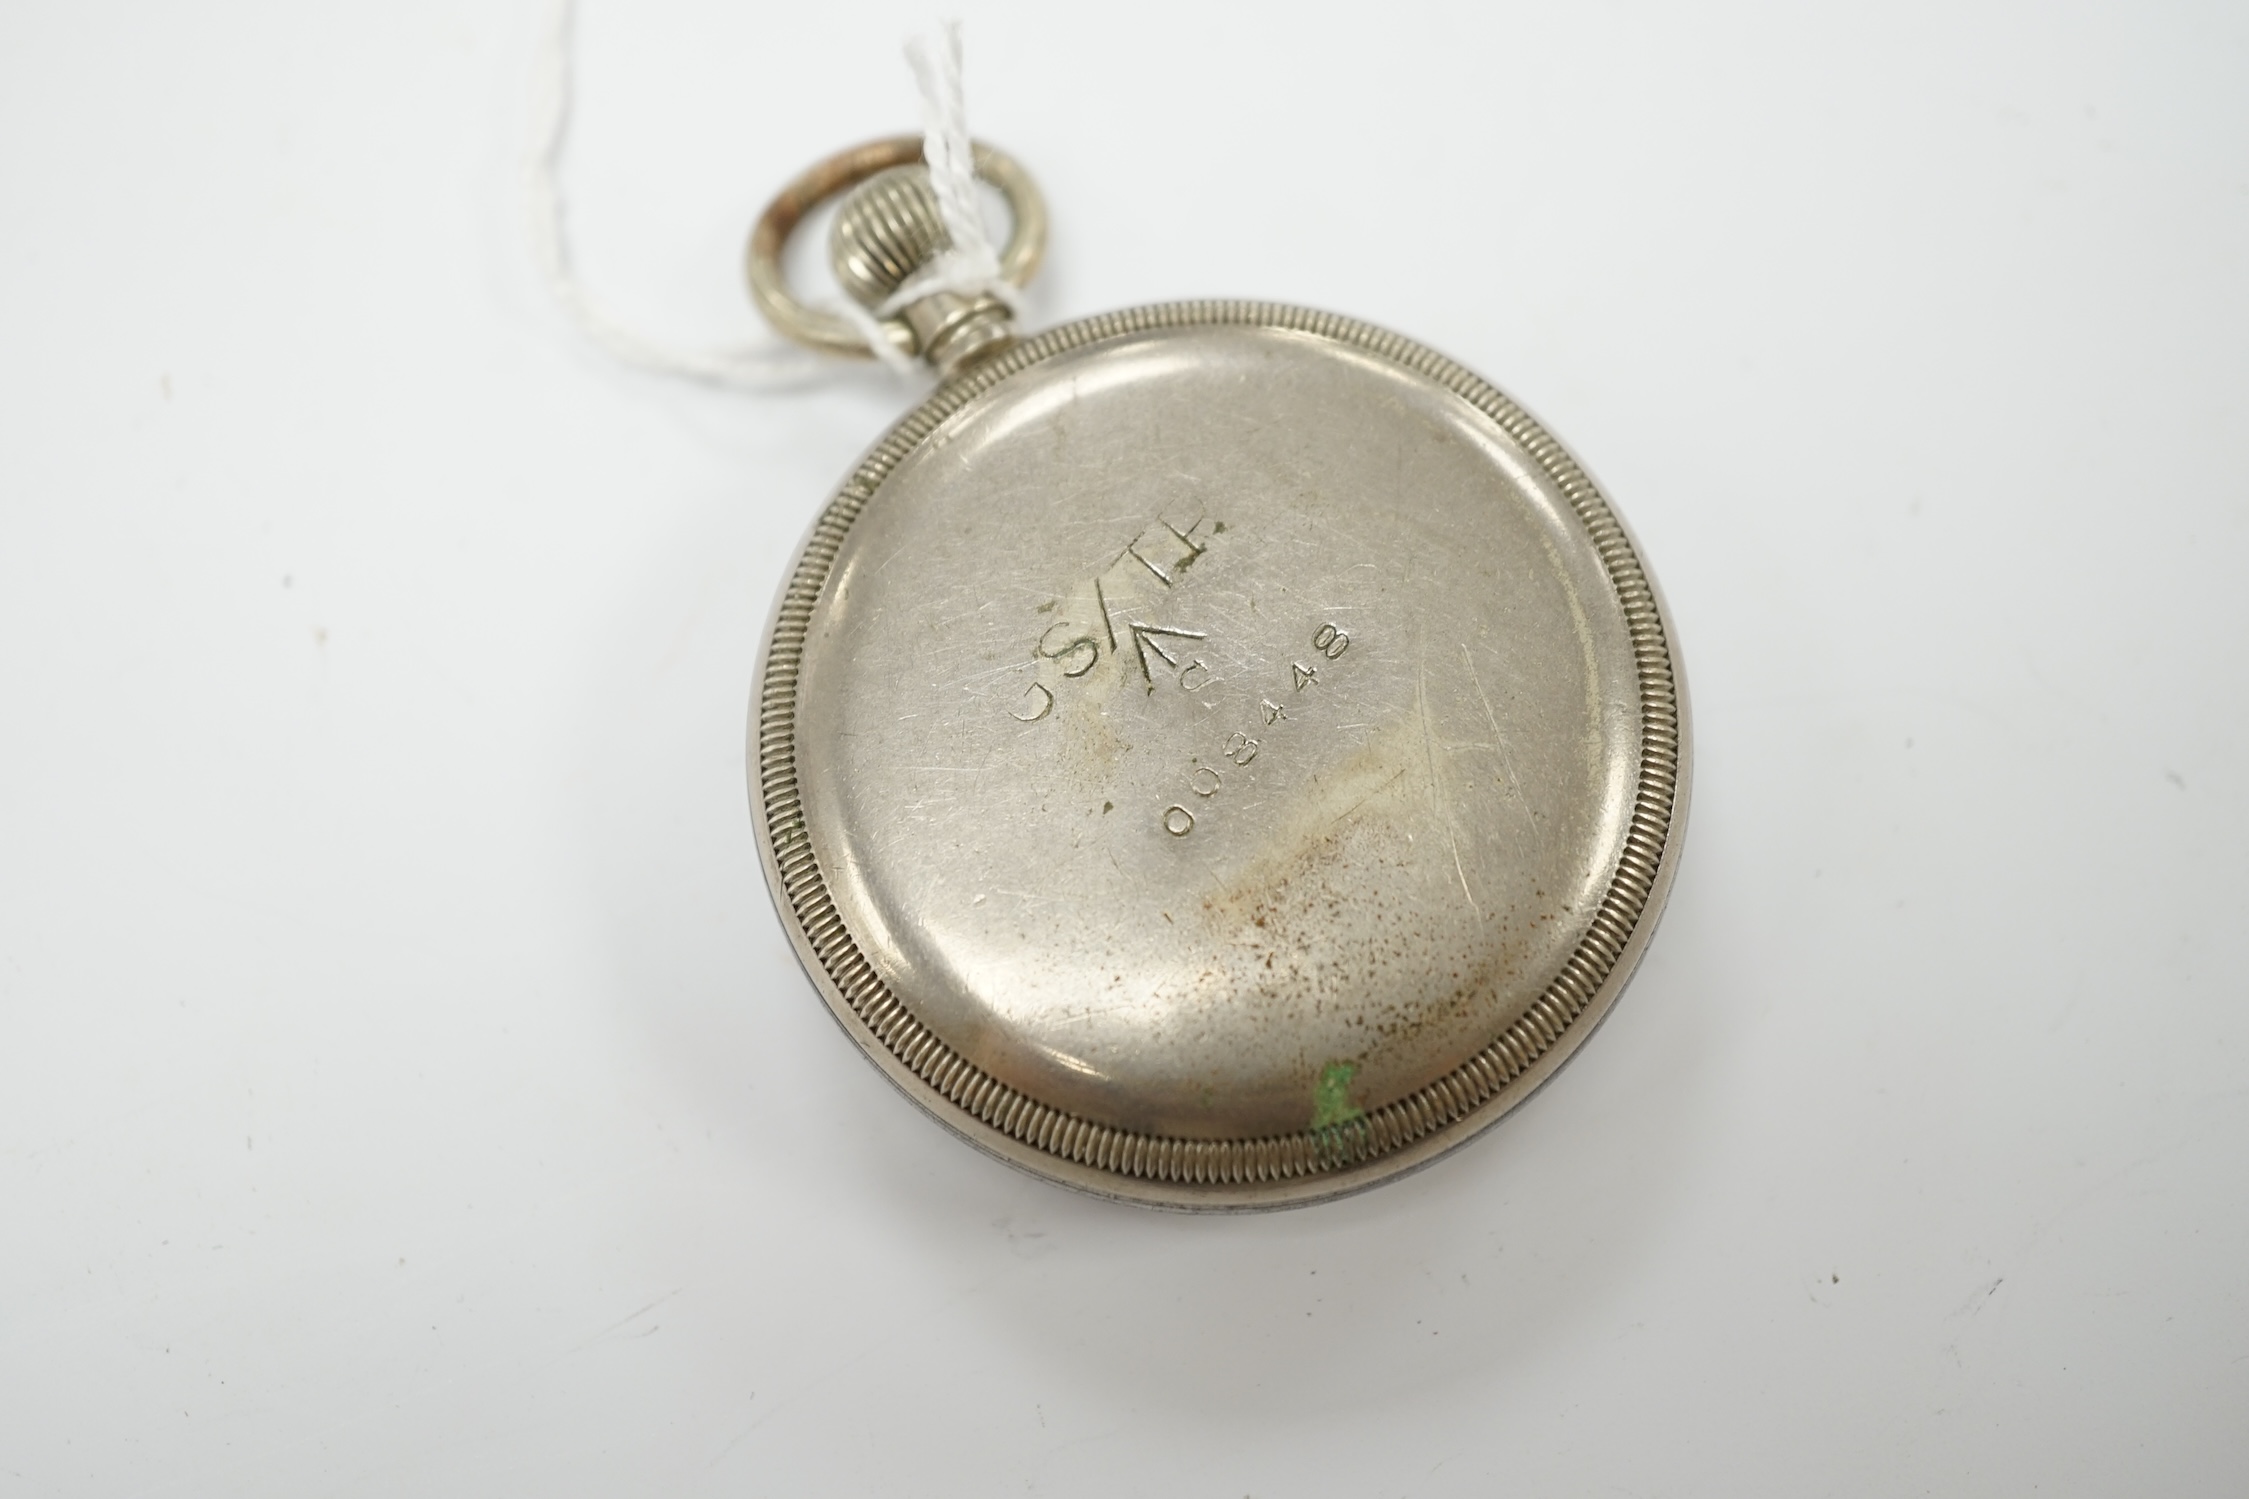 A military issue Swiss pocket watch, stamped to the reverse; GS/TP S 008448 with broad arrow.